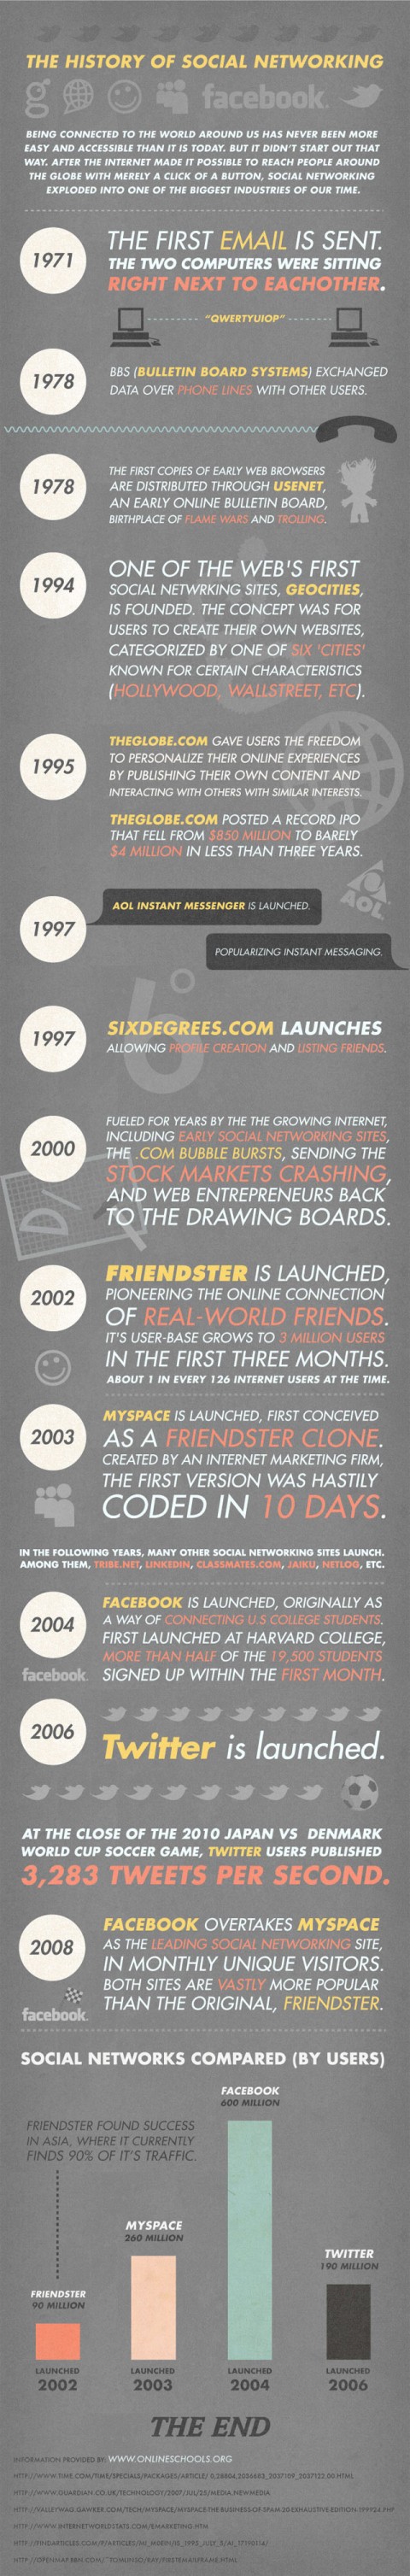 History of Social Media Infographic